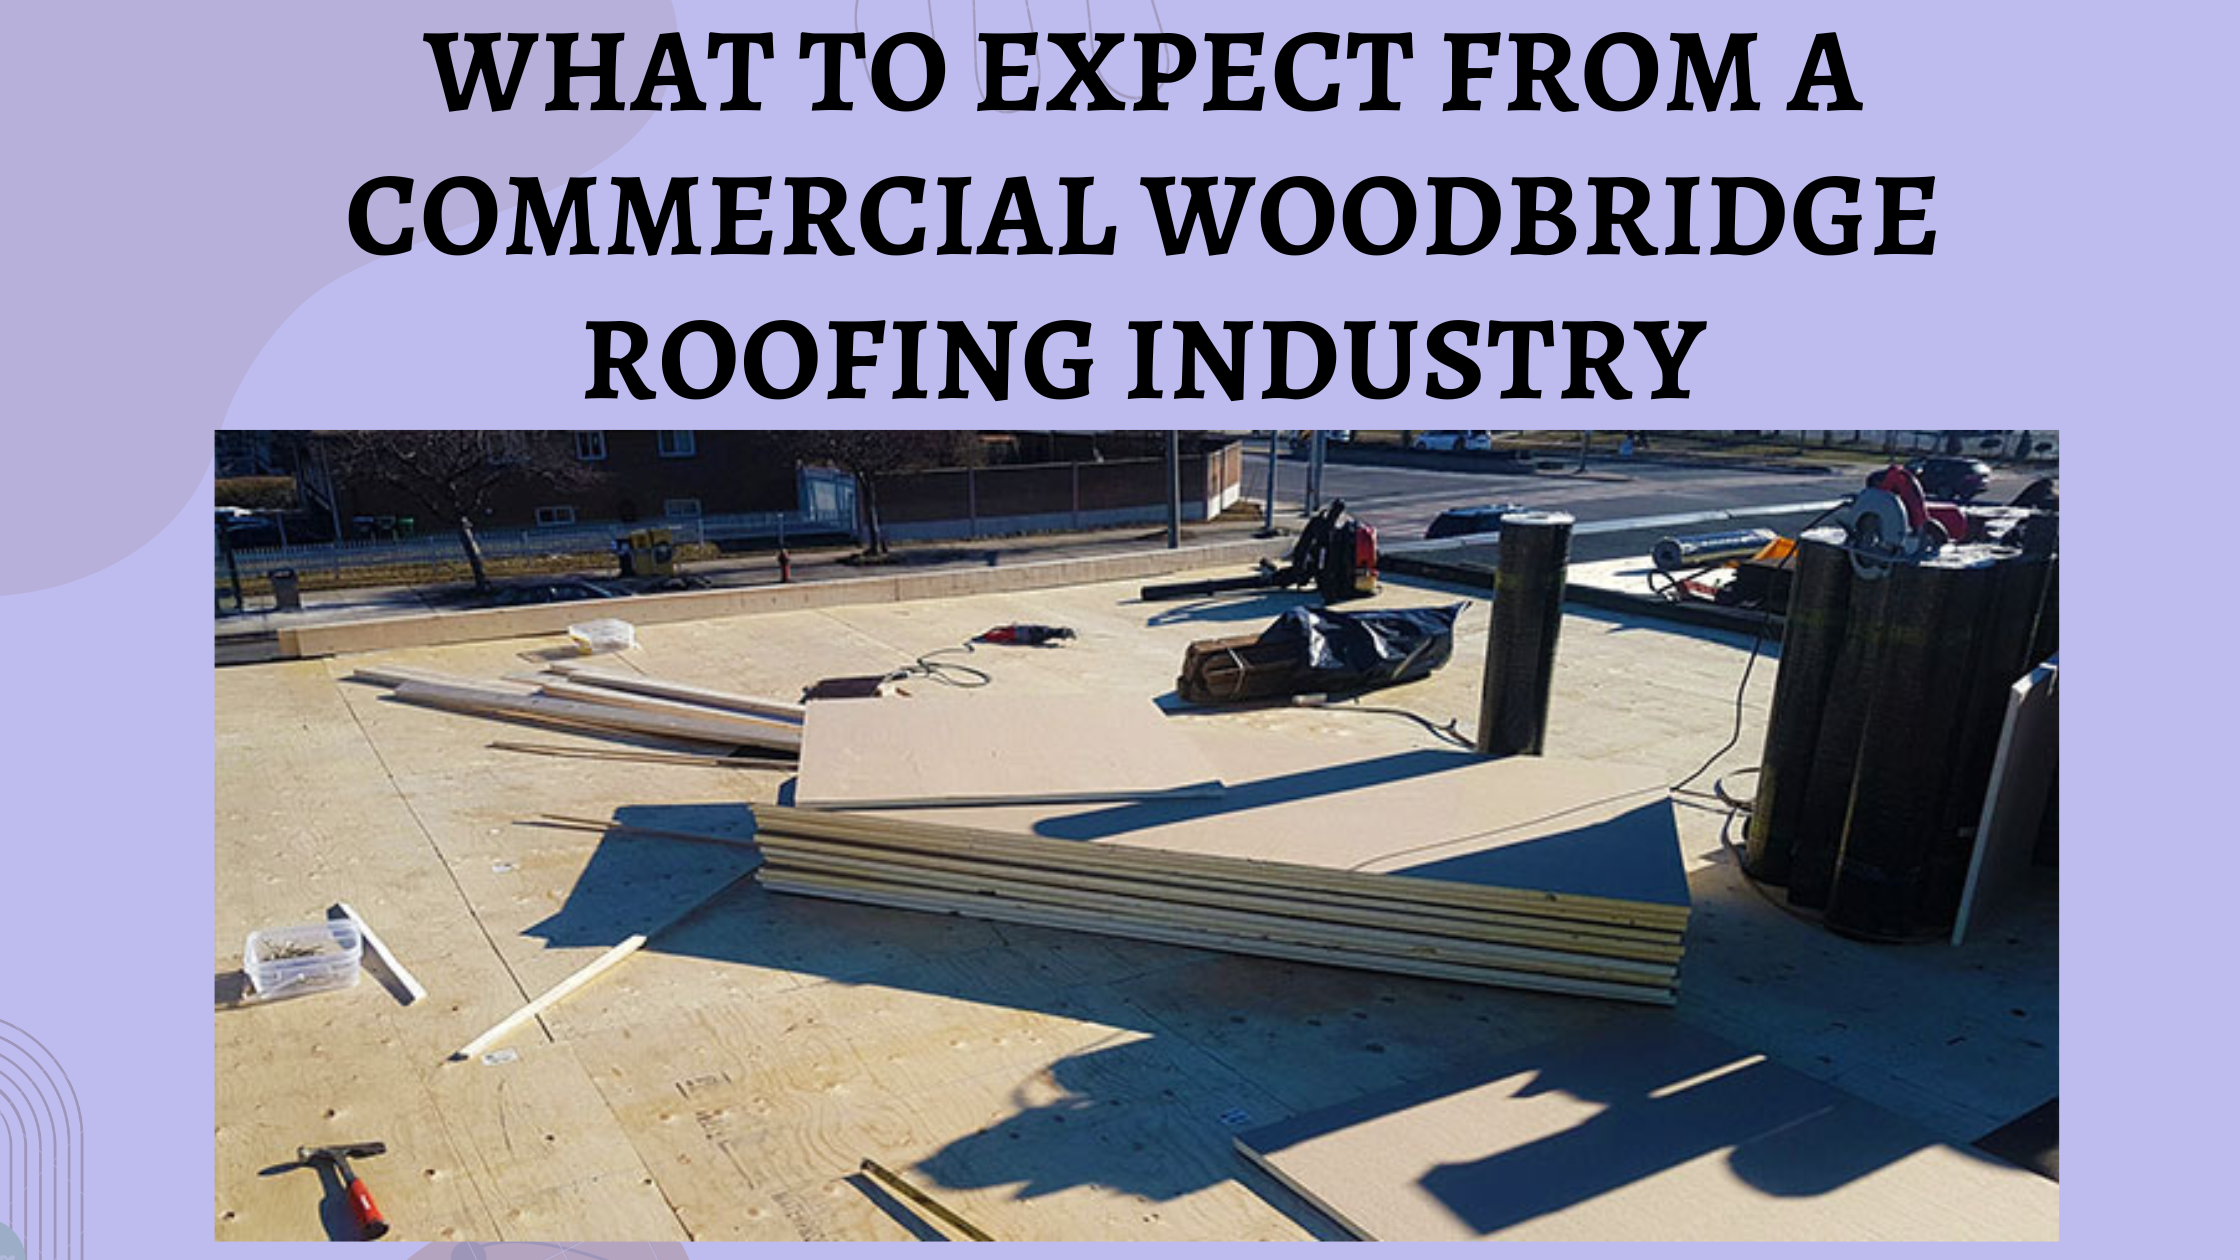 Commercial Woodbridge Roofing Industry Expectations